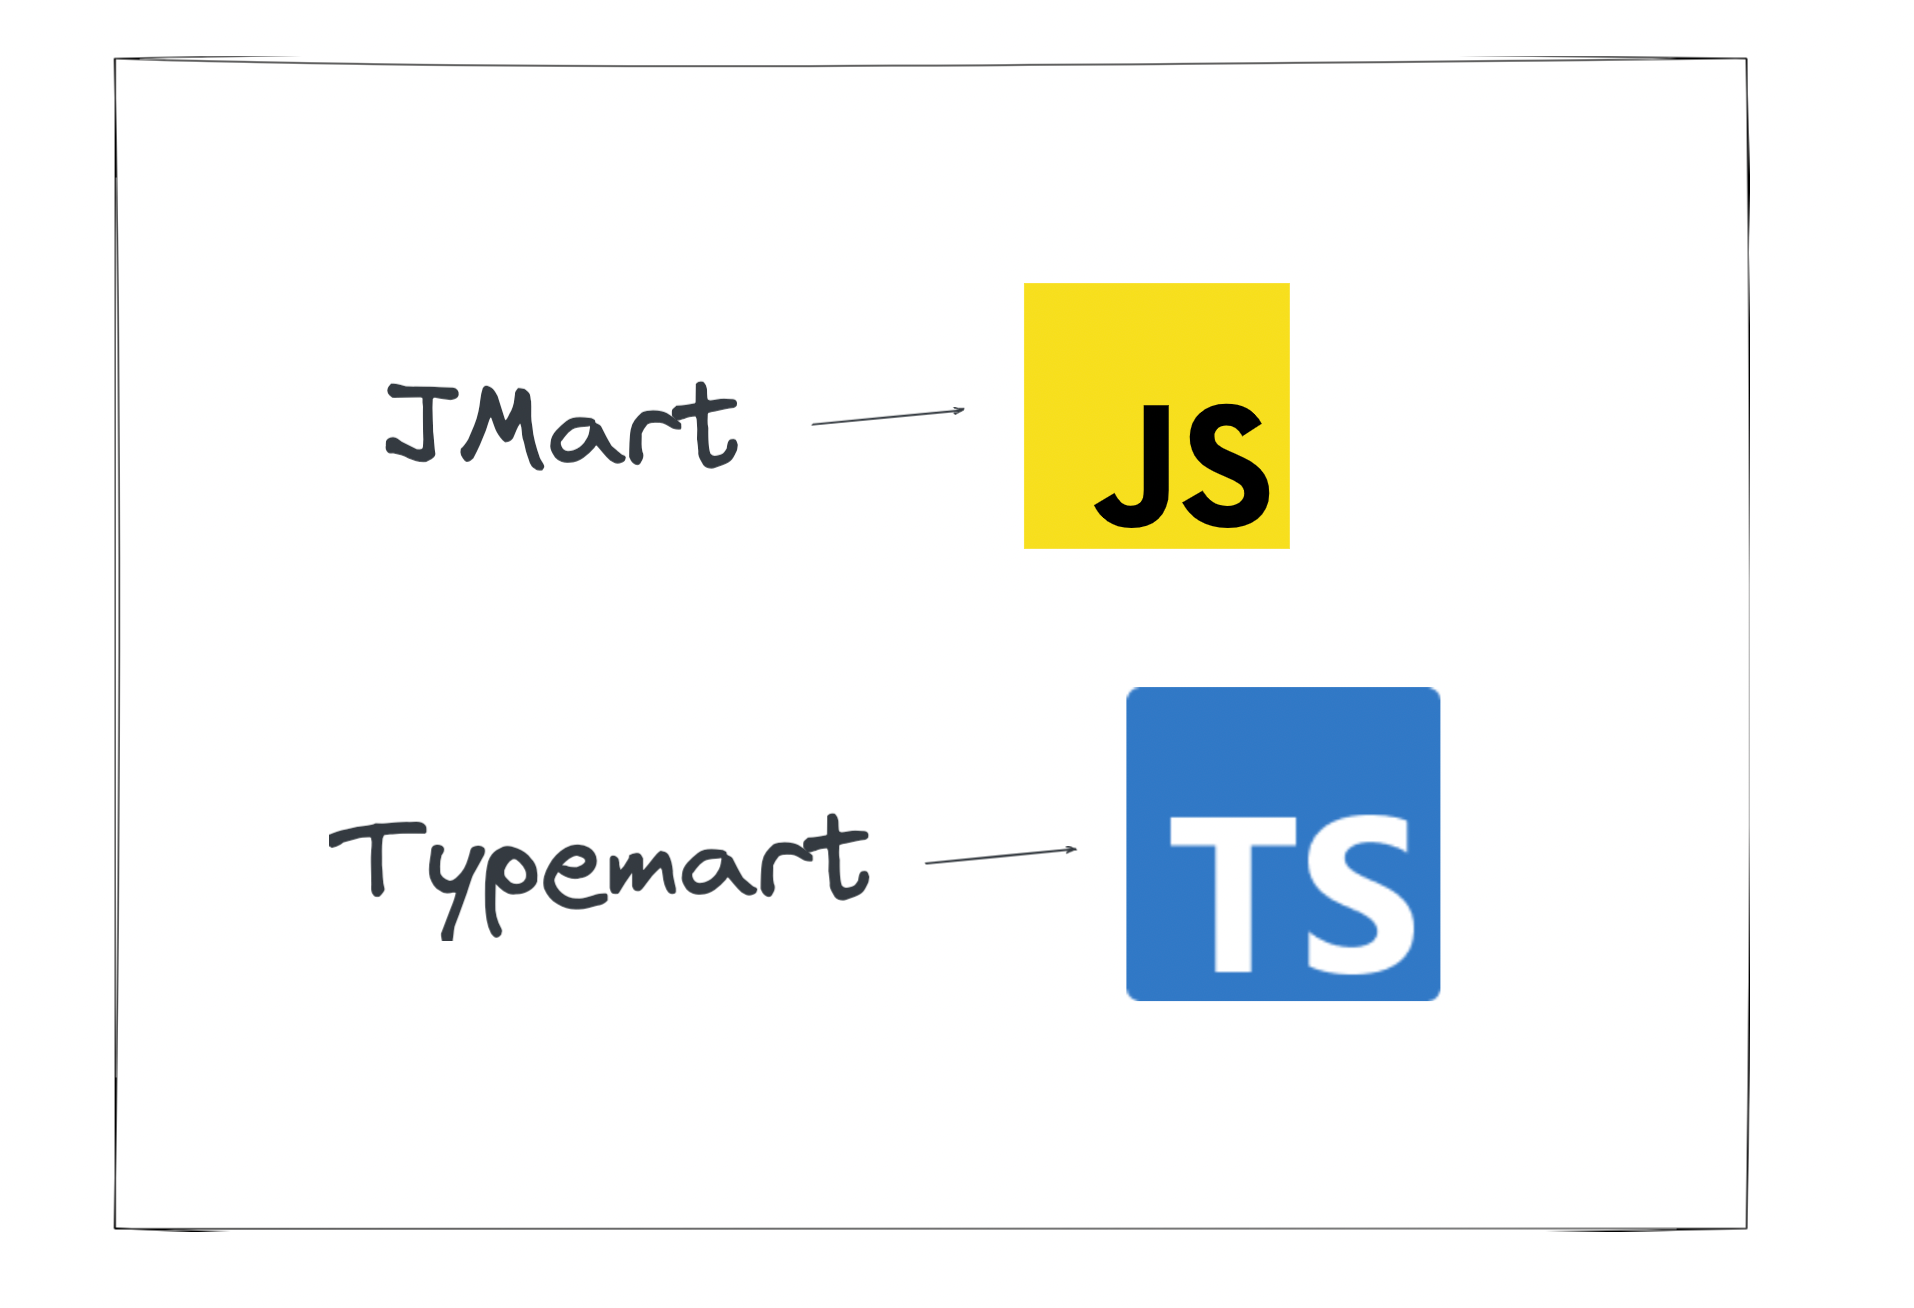 What is Typescript?